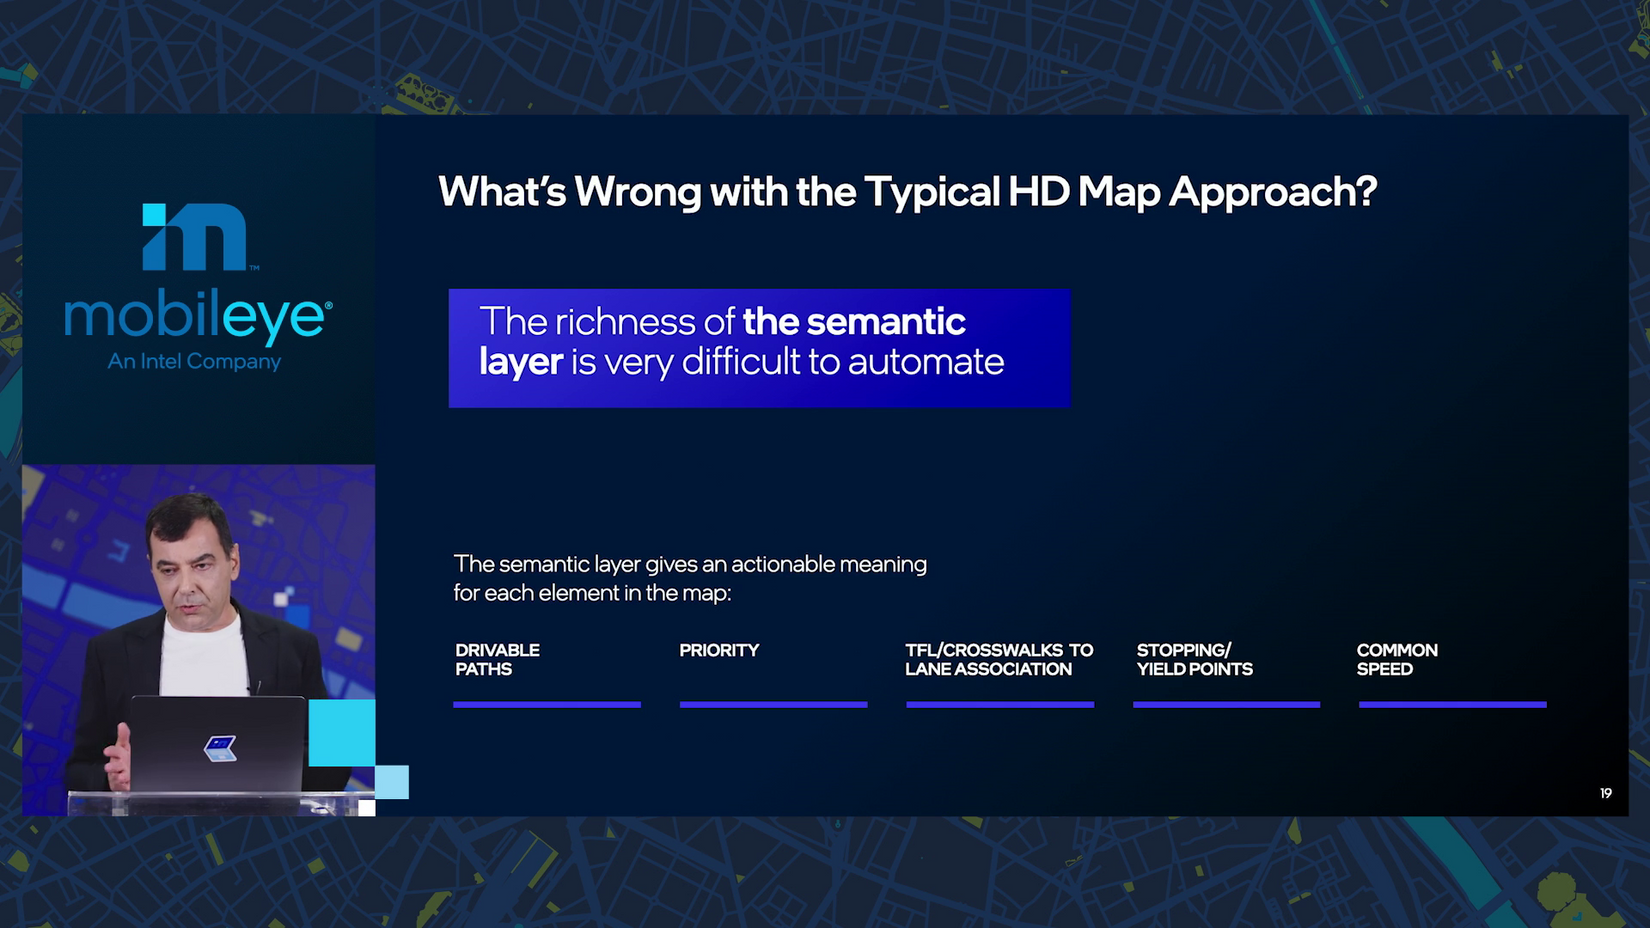 What's wrong with the typical HD map approach? Part 1